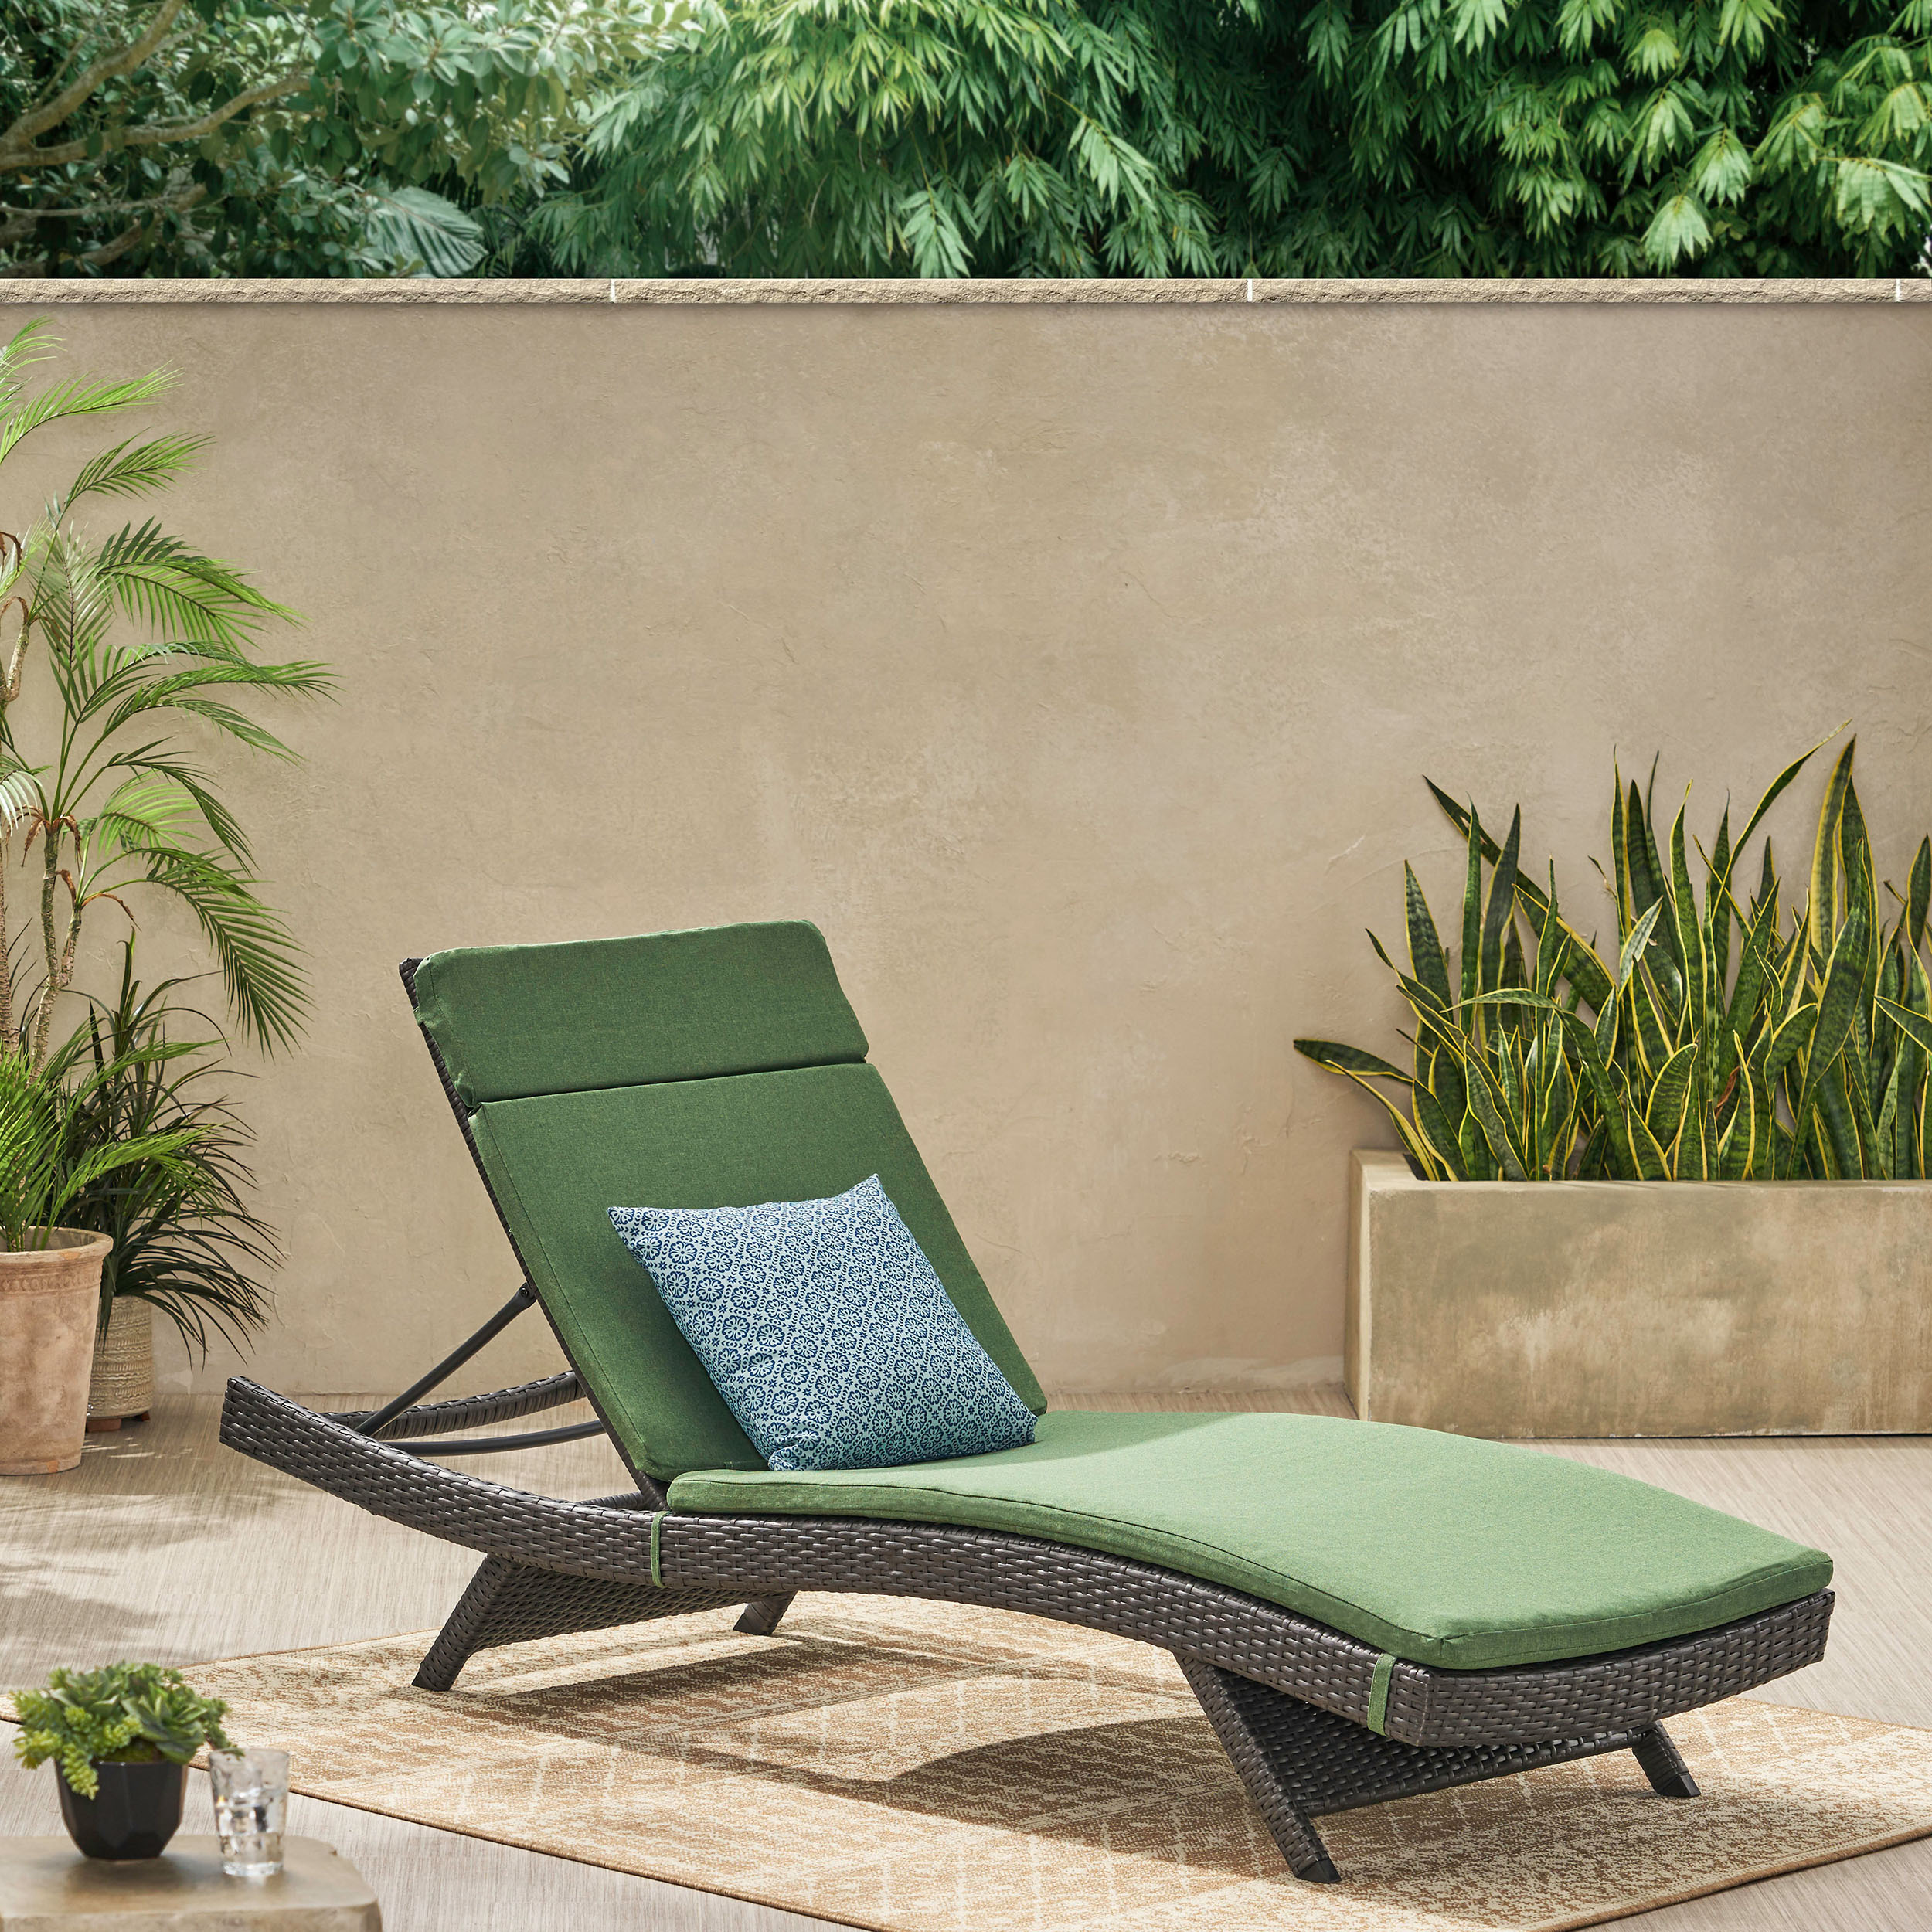 GDF Studio Olivia Outdoor Wicker Armless Adjustable Chaise Lounge with Cushion, Gray and Jungle Green - image 2 of 12